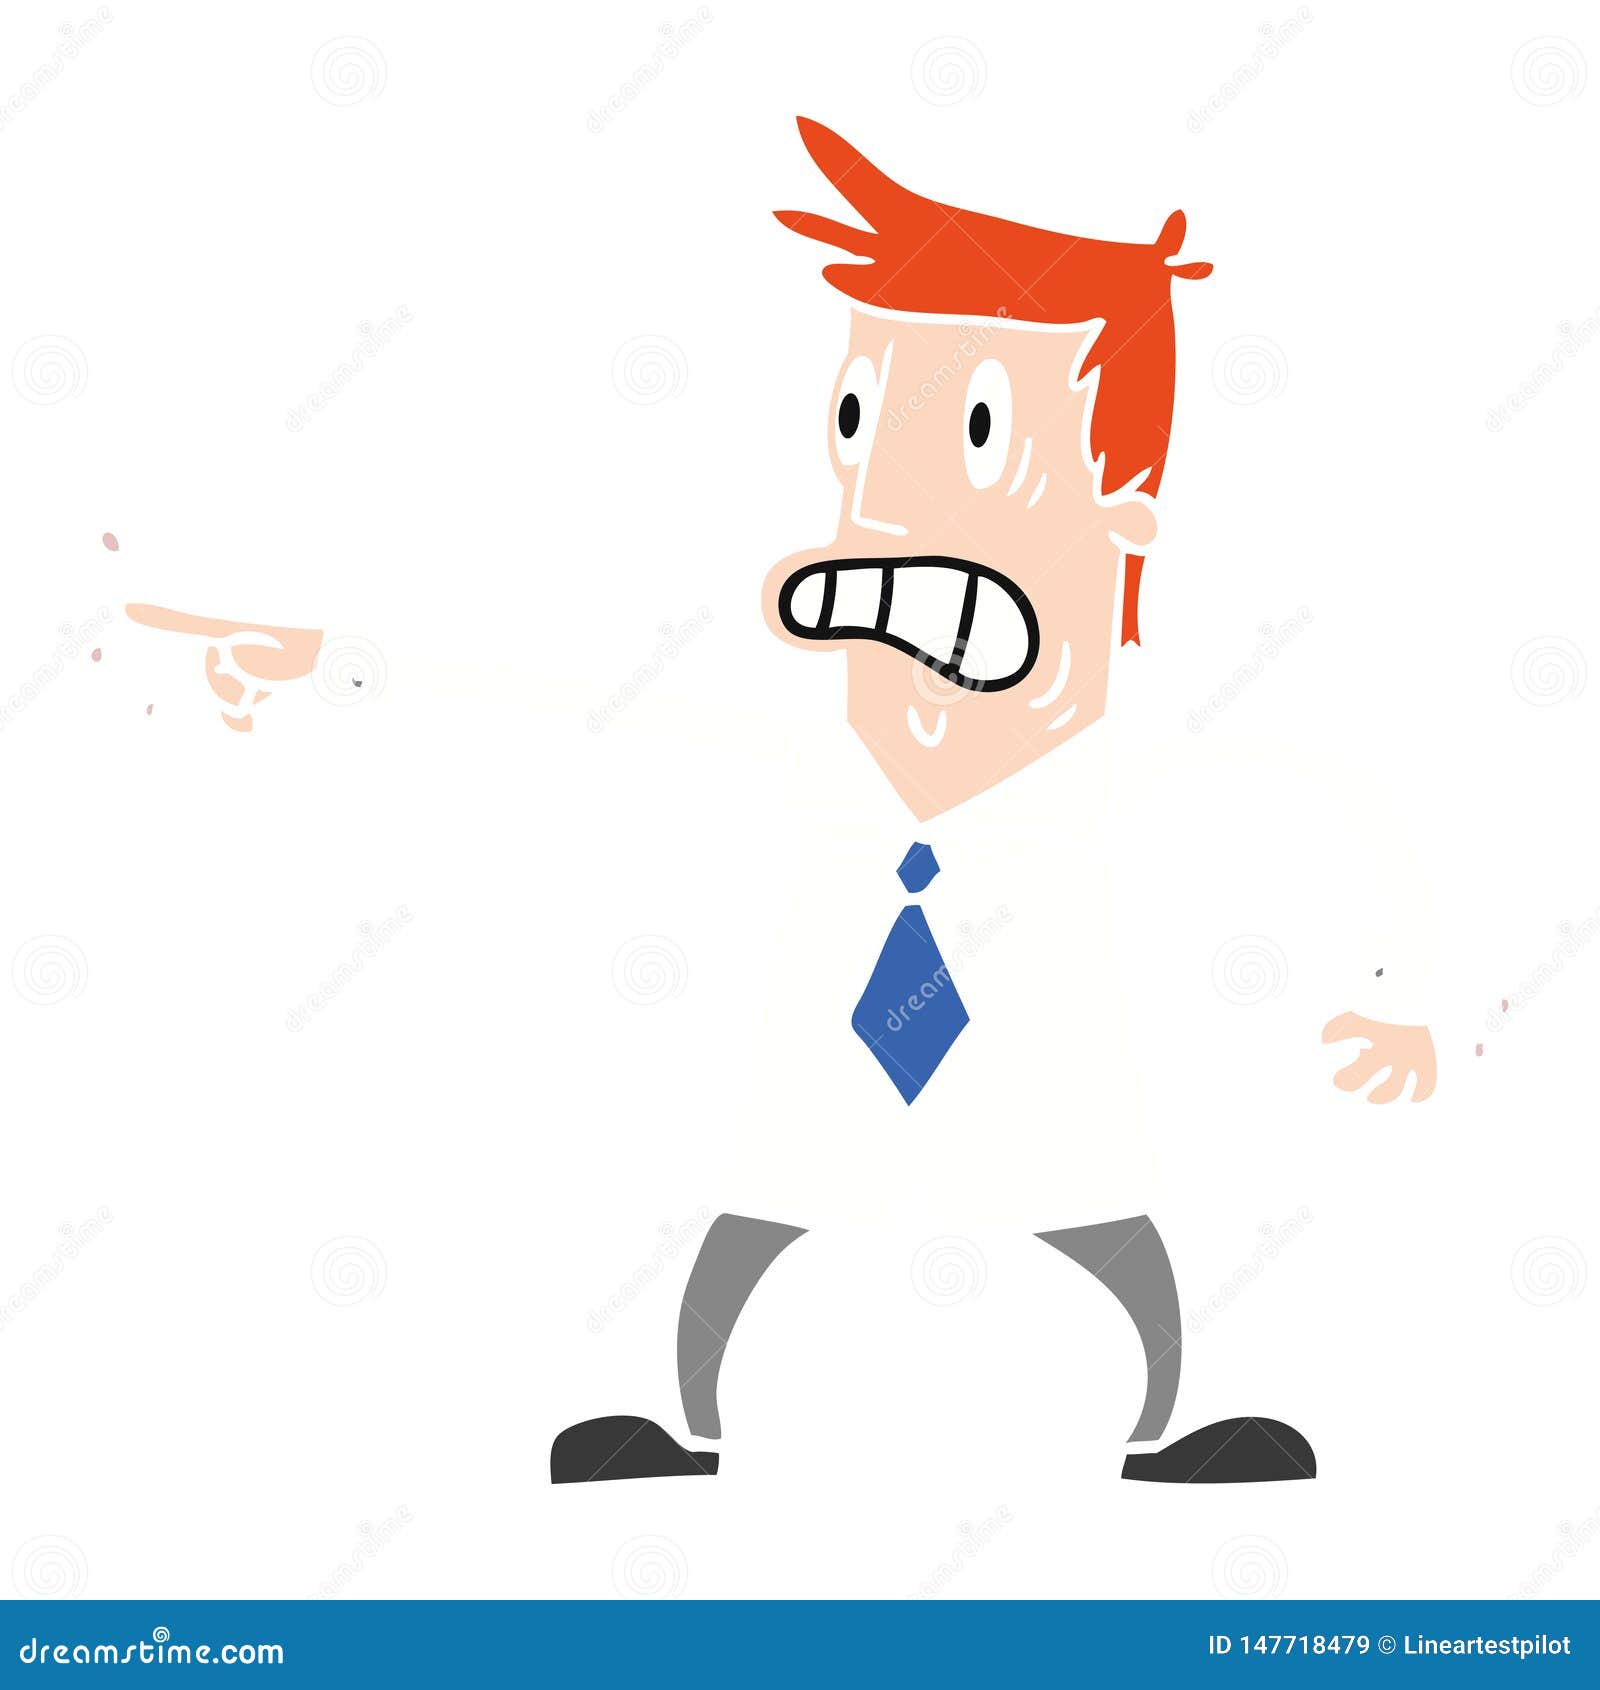 Cartoon Doodle Man Pointing Looking Worried Stock Vector - Illustration of  artwork, business: 147718479